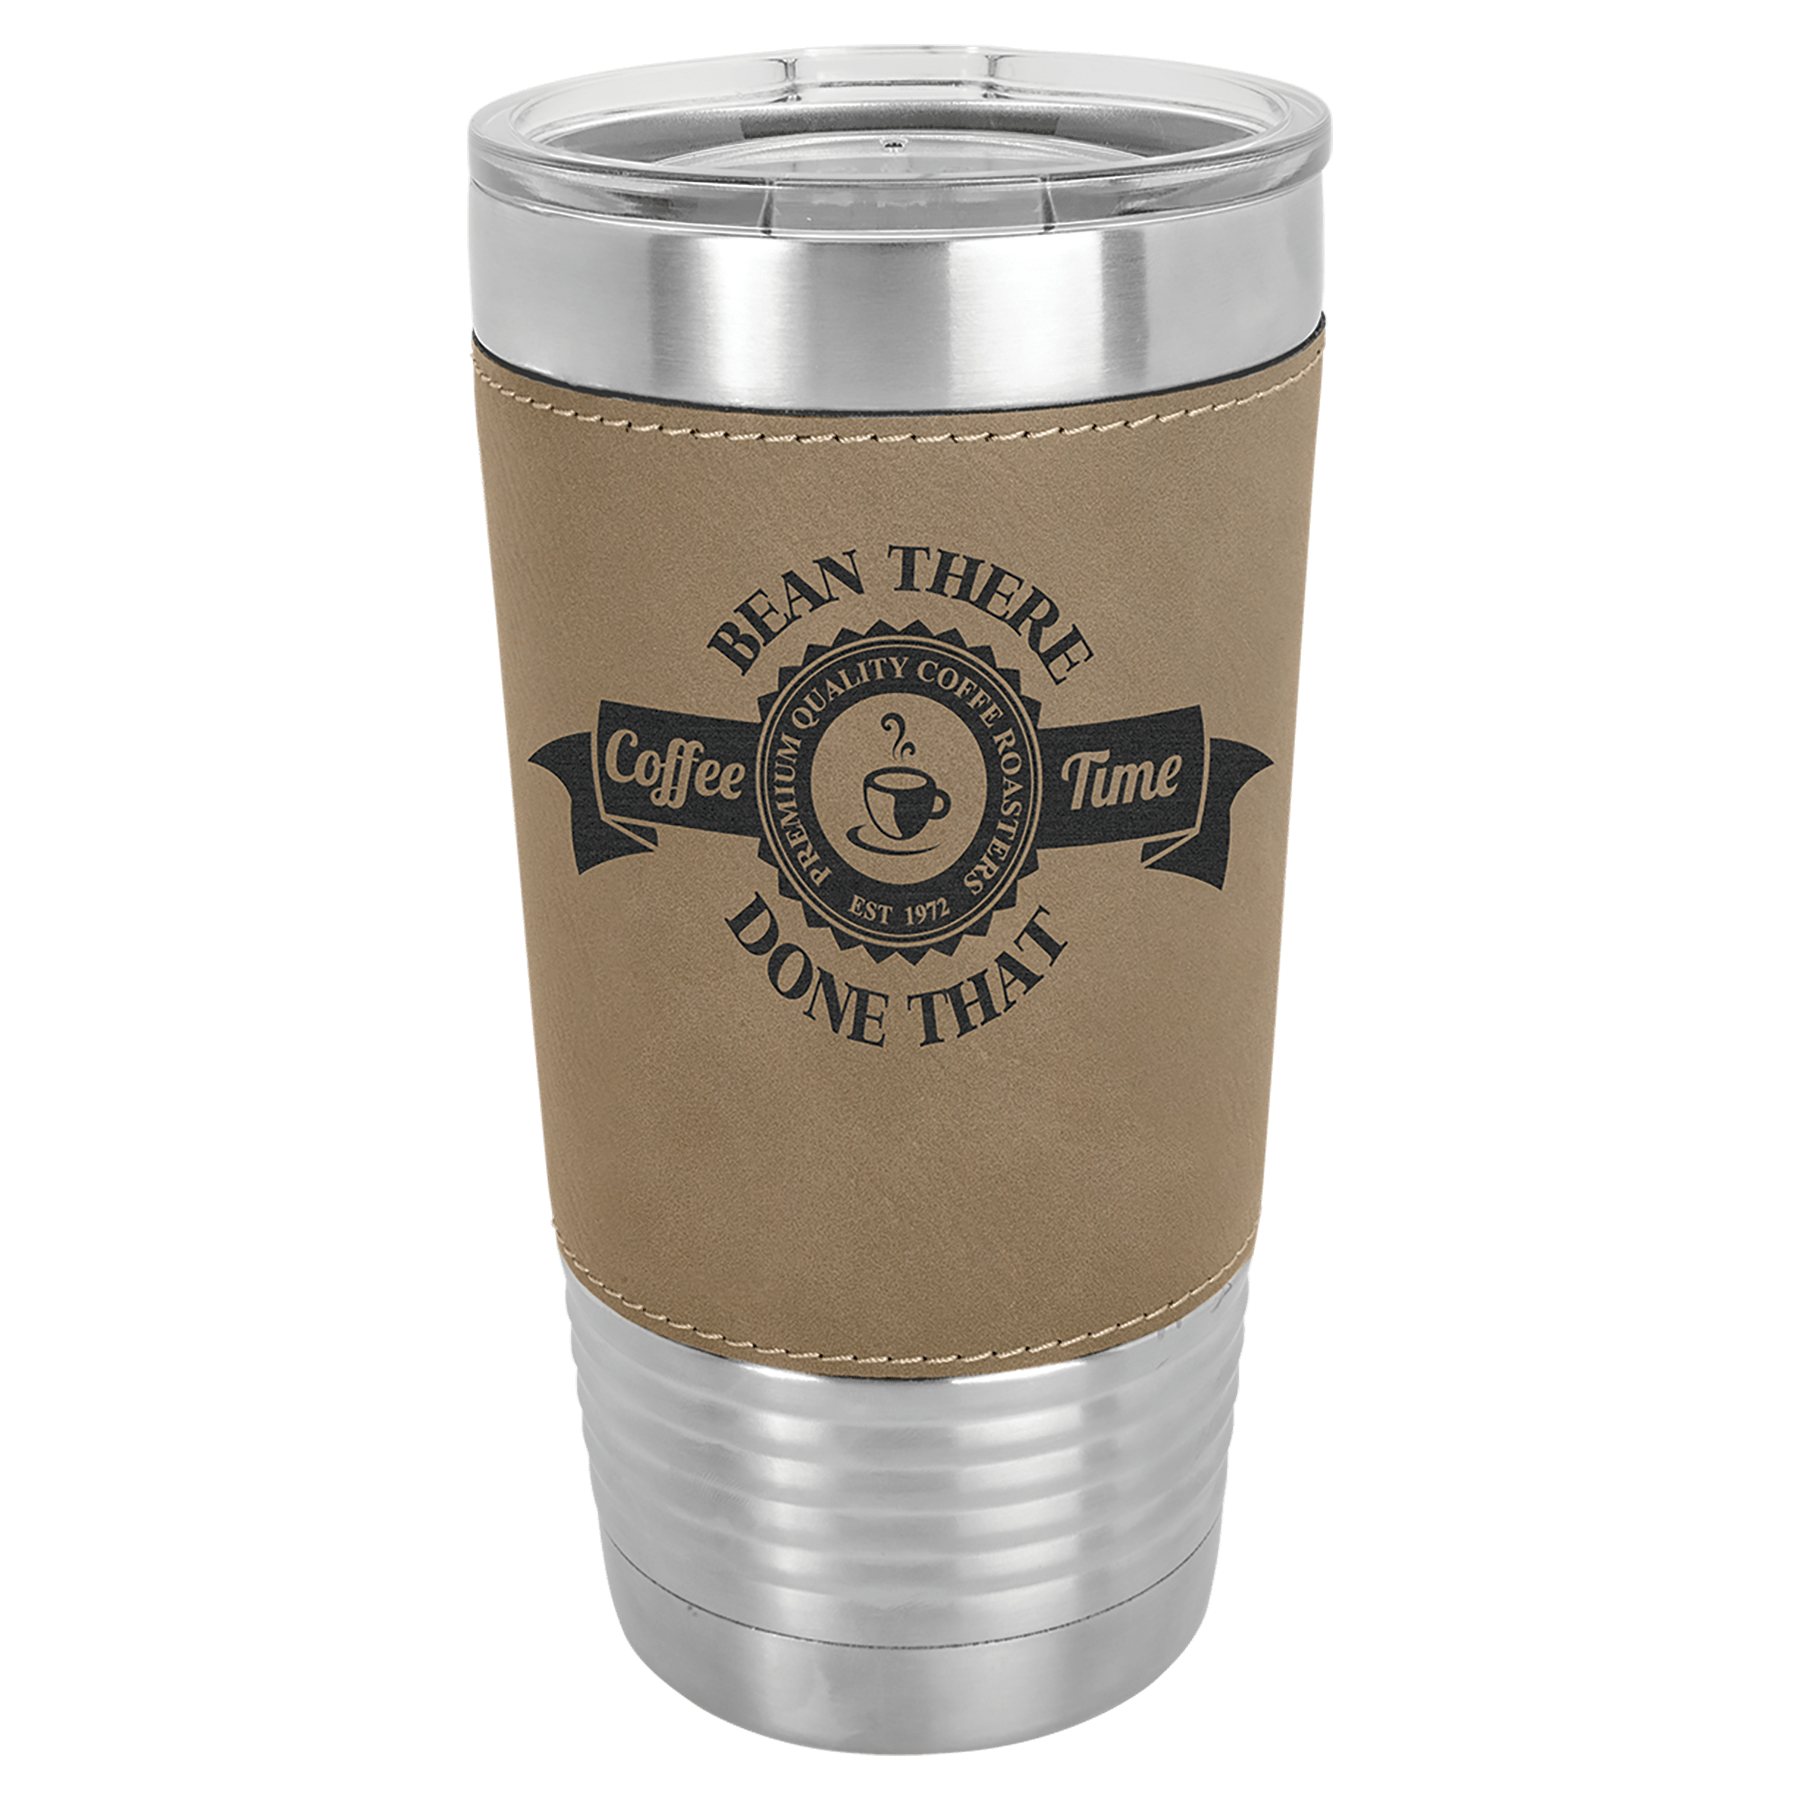 20 oz Vacuum Insulated Tumbler with Leatherette Grip and "Free Engraving"